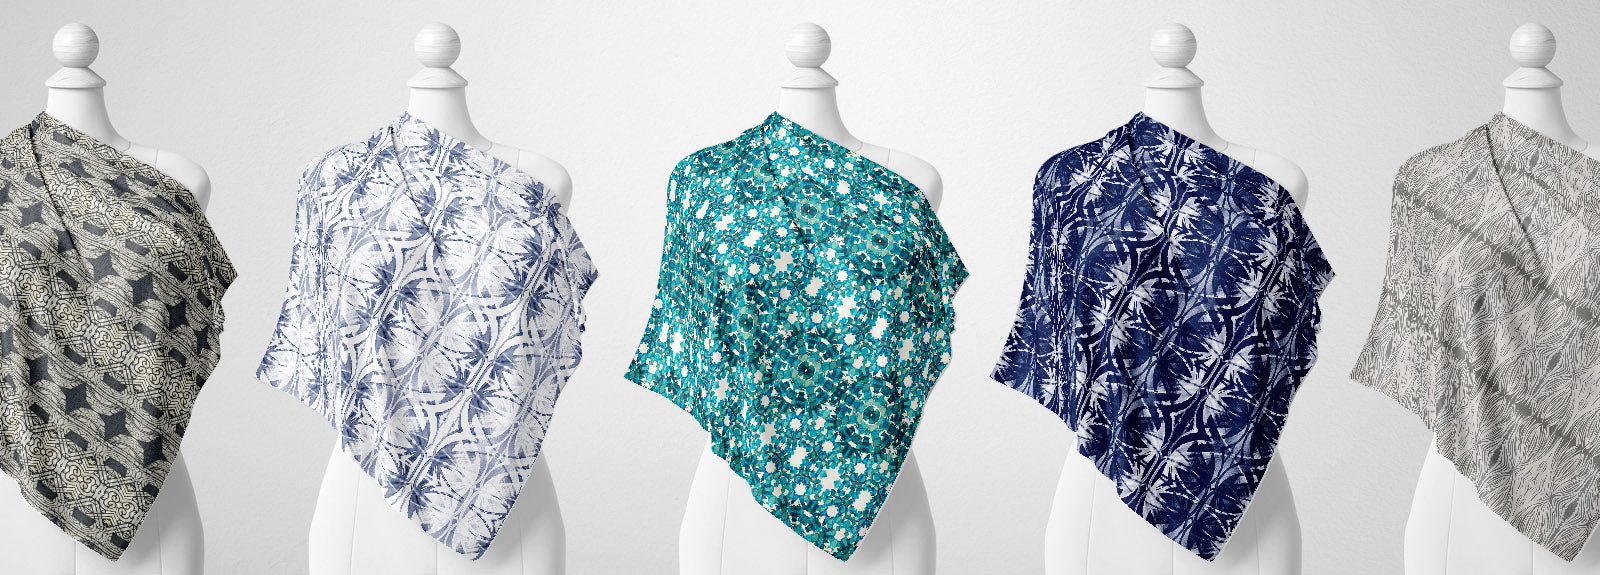 Row of mannequins wearing silk scarves, featuring blue and gray hand-painted patterns.